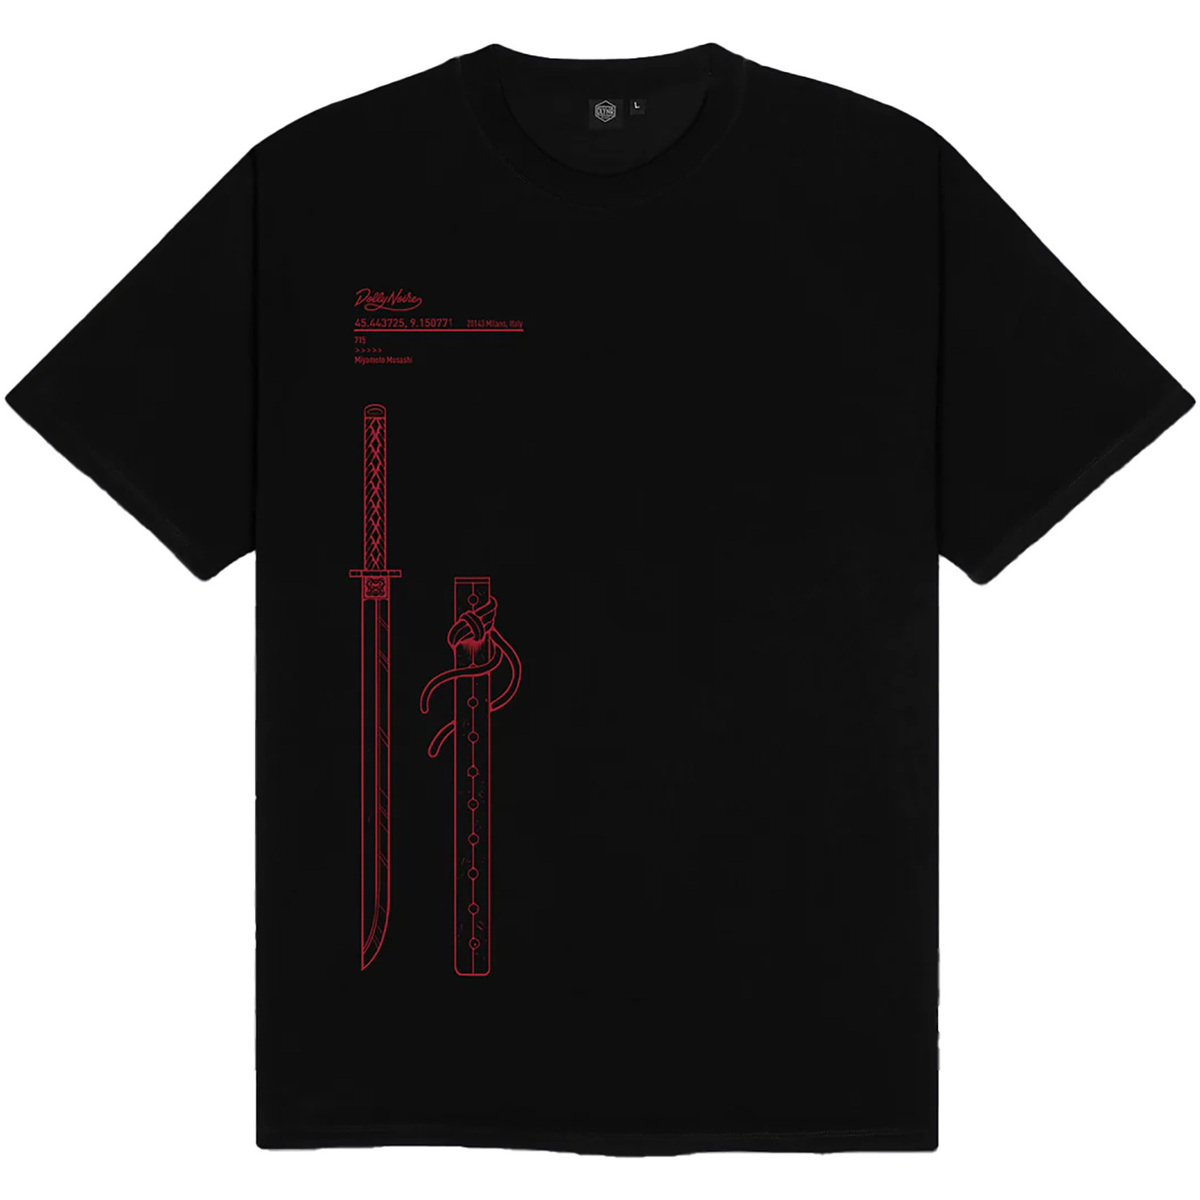 textil Hombre Tops y Camisetas Dolly Noire Miyamoto Musashi Outline Tee Negro